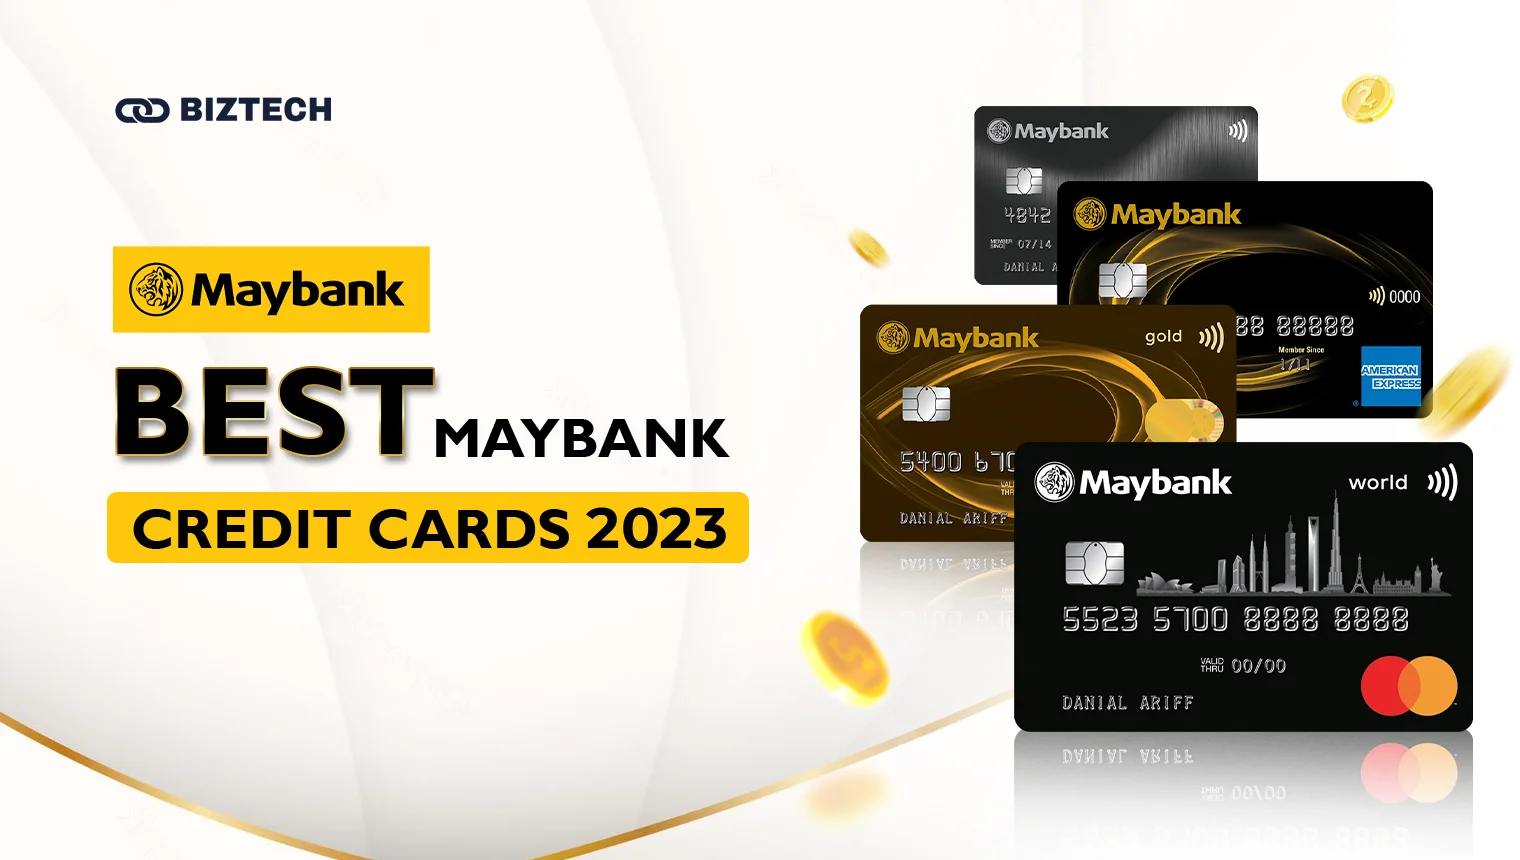 The Best Maybank Credit Cards in Malaysia 2023 – Compare the Promotions from Each Cards